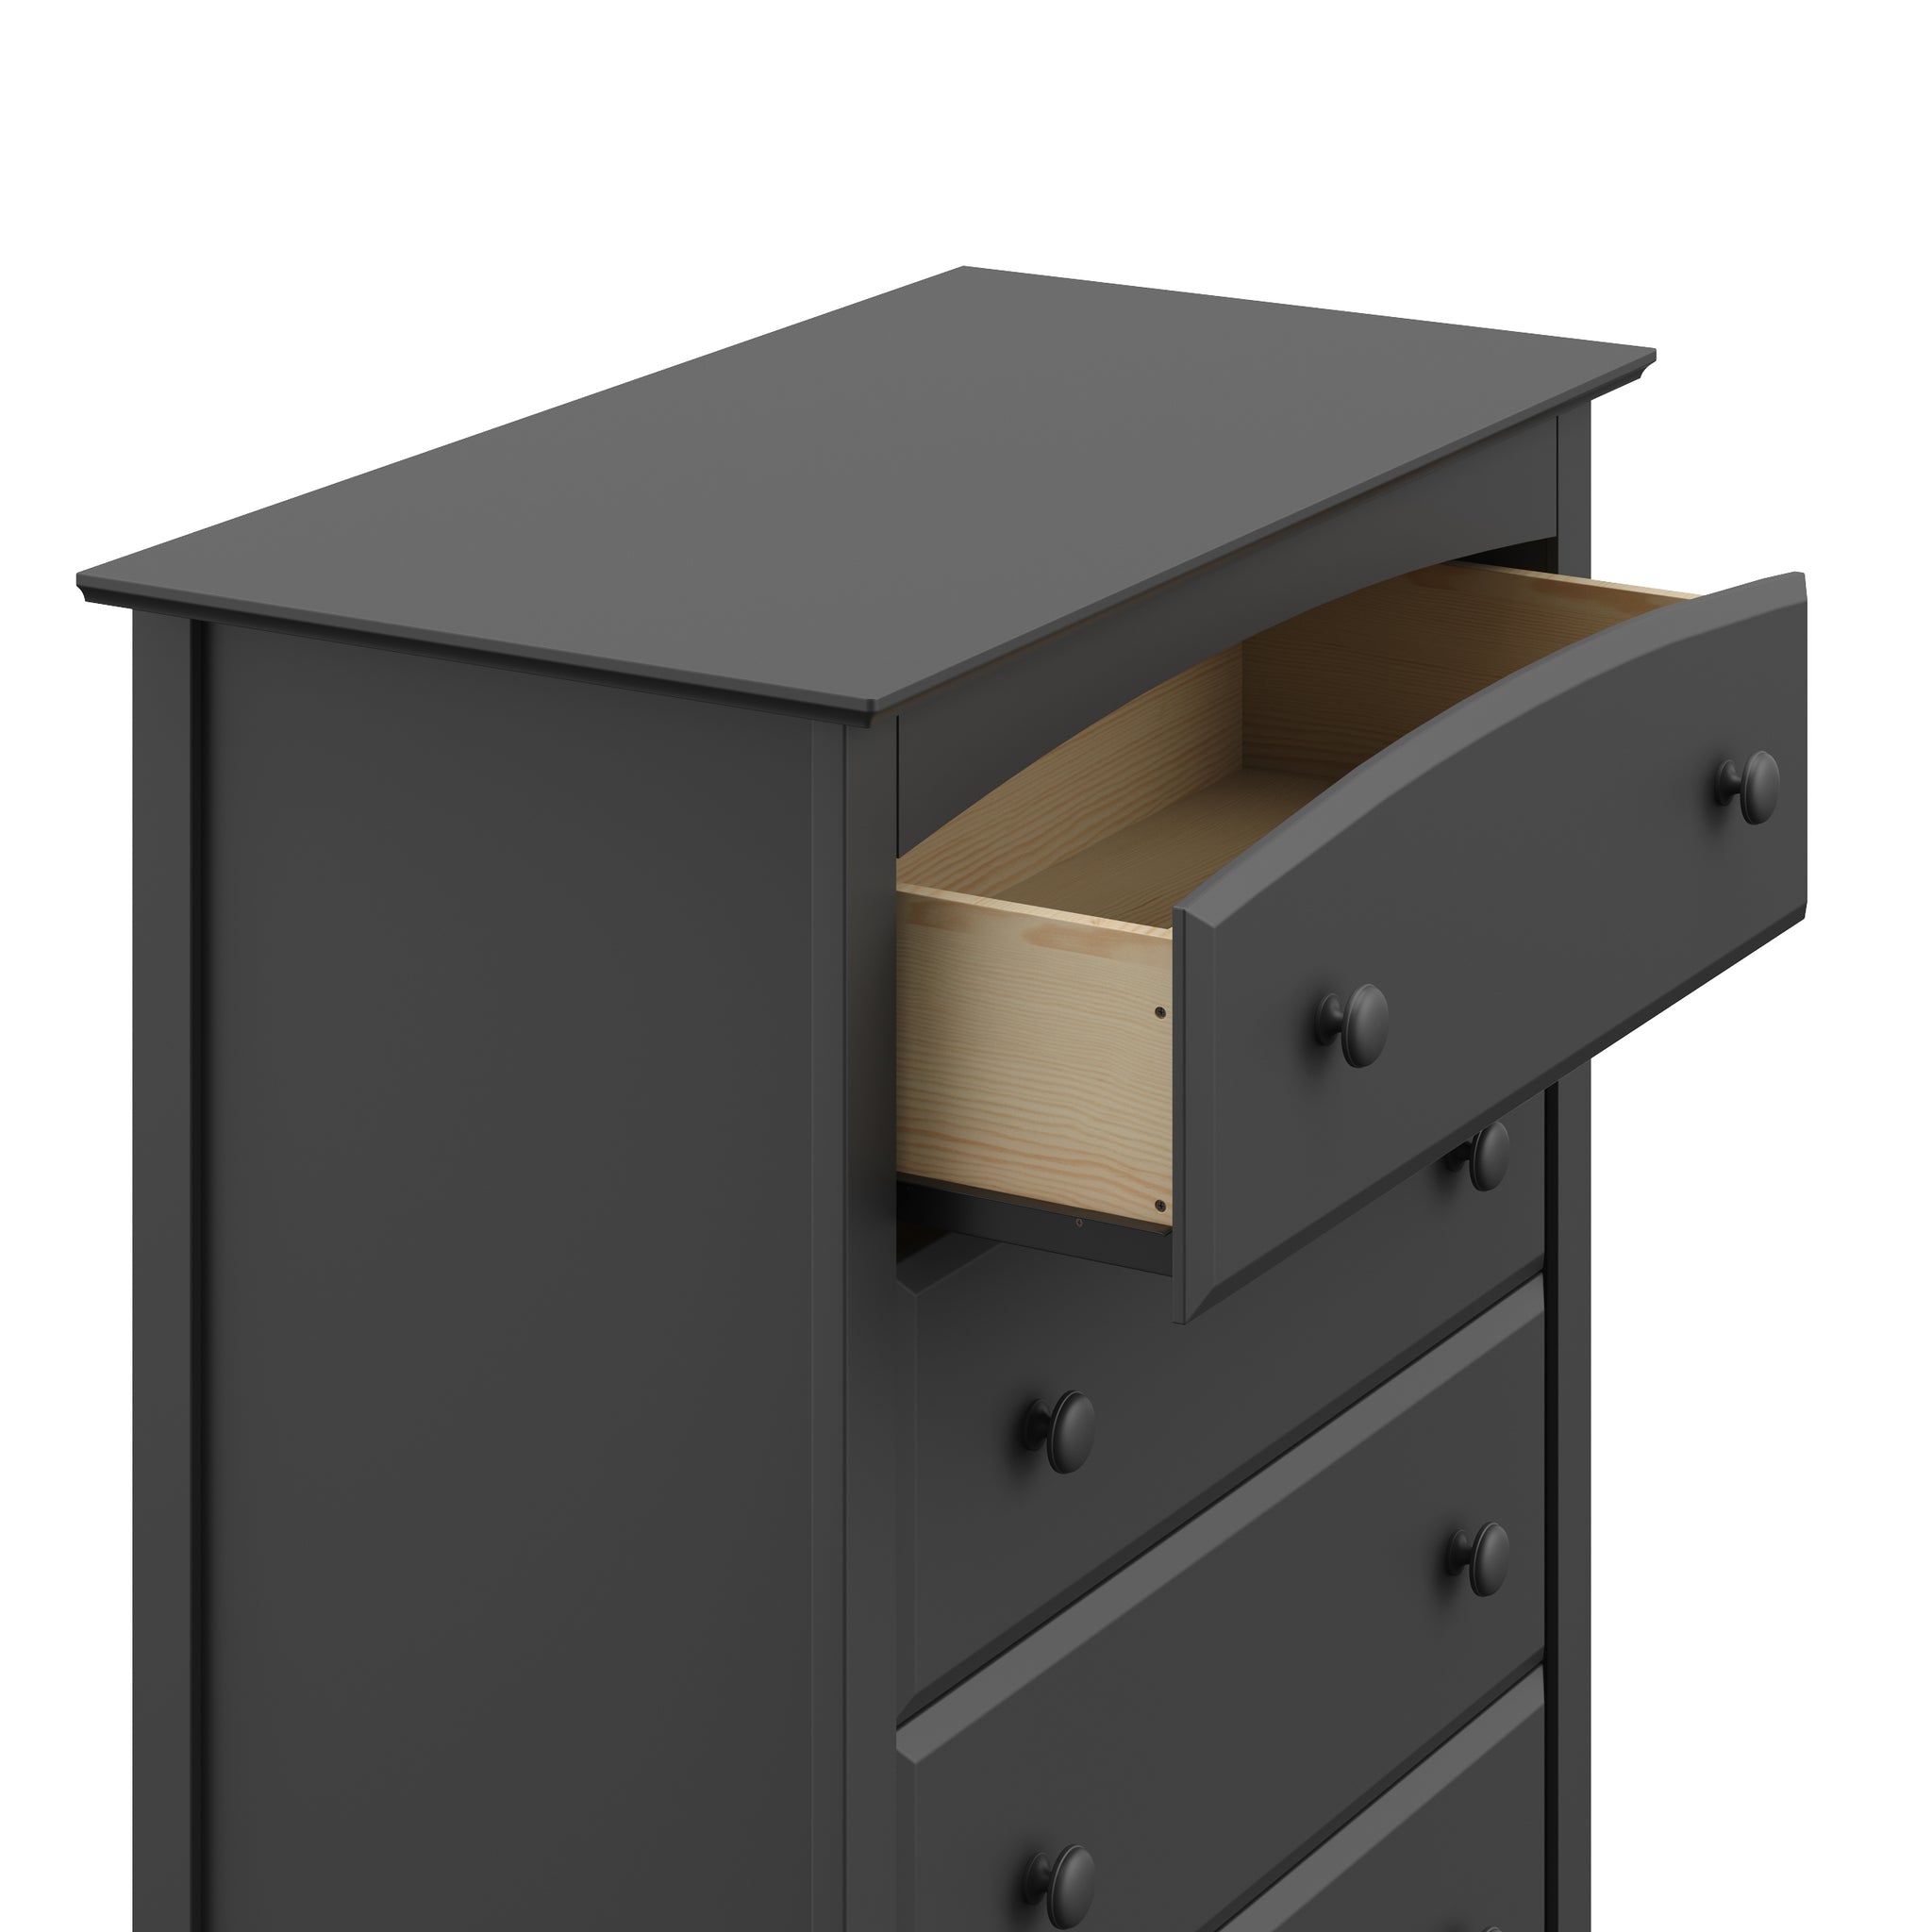 gray 5 drawer chest with open drawer